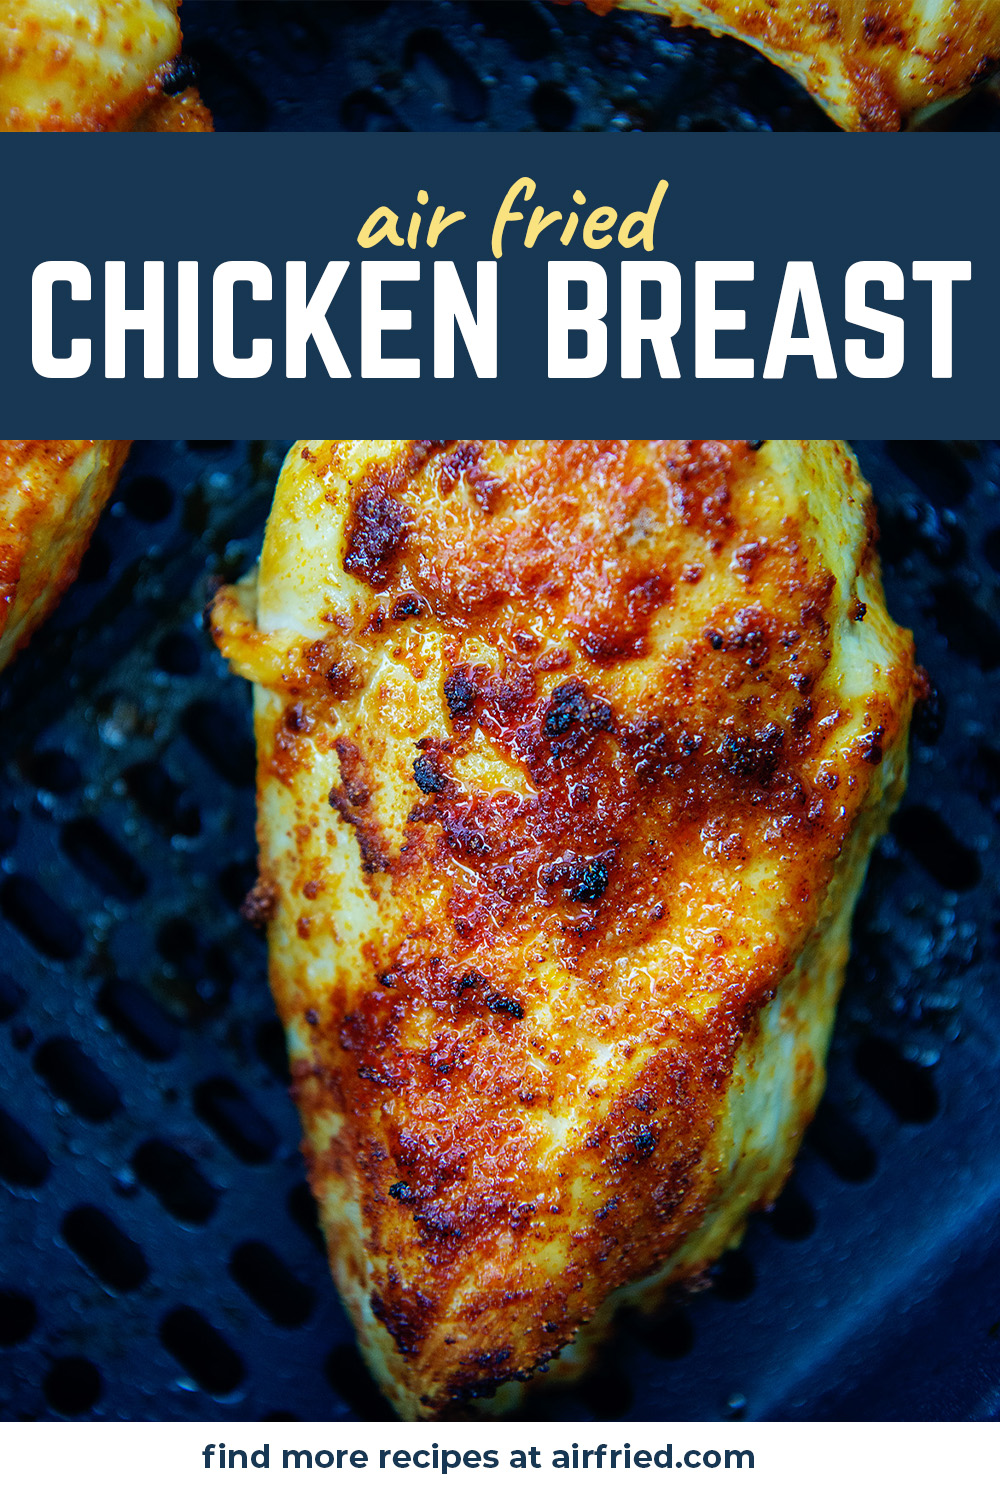 The air fryer is the easiest way to cook a tender and juicy chicken breast!